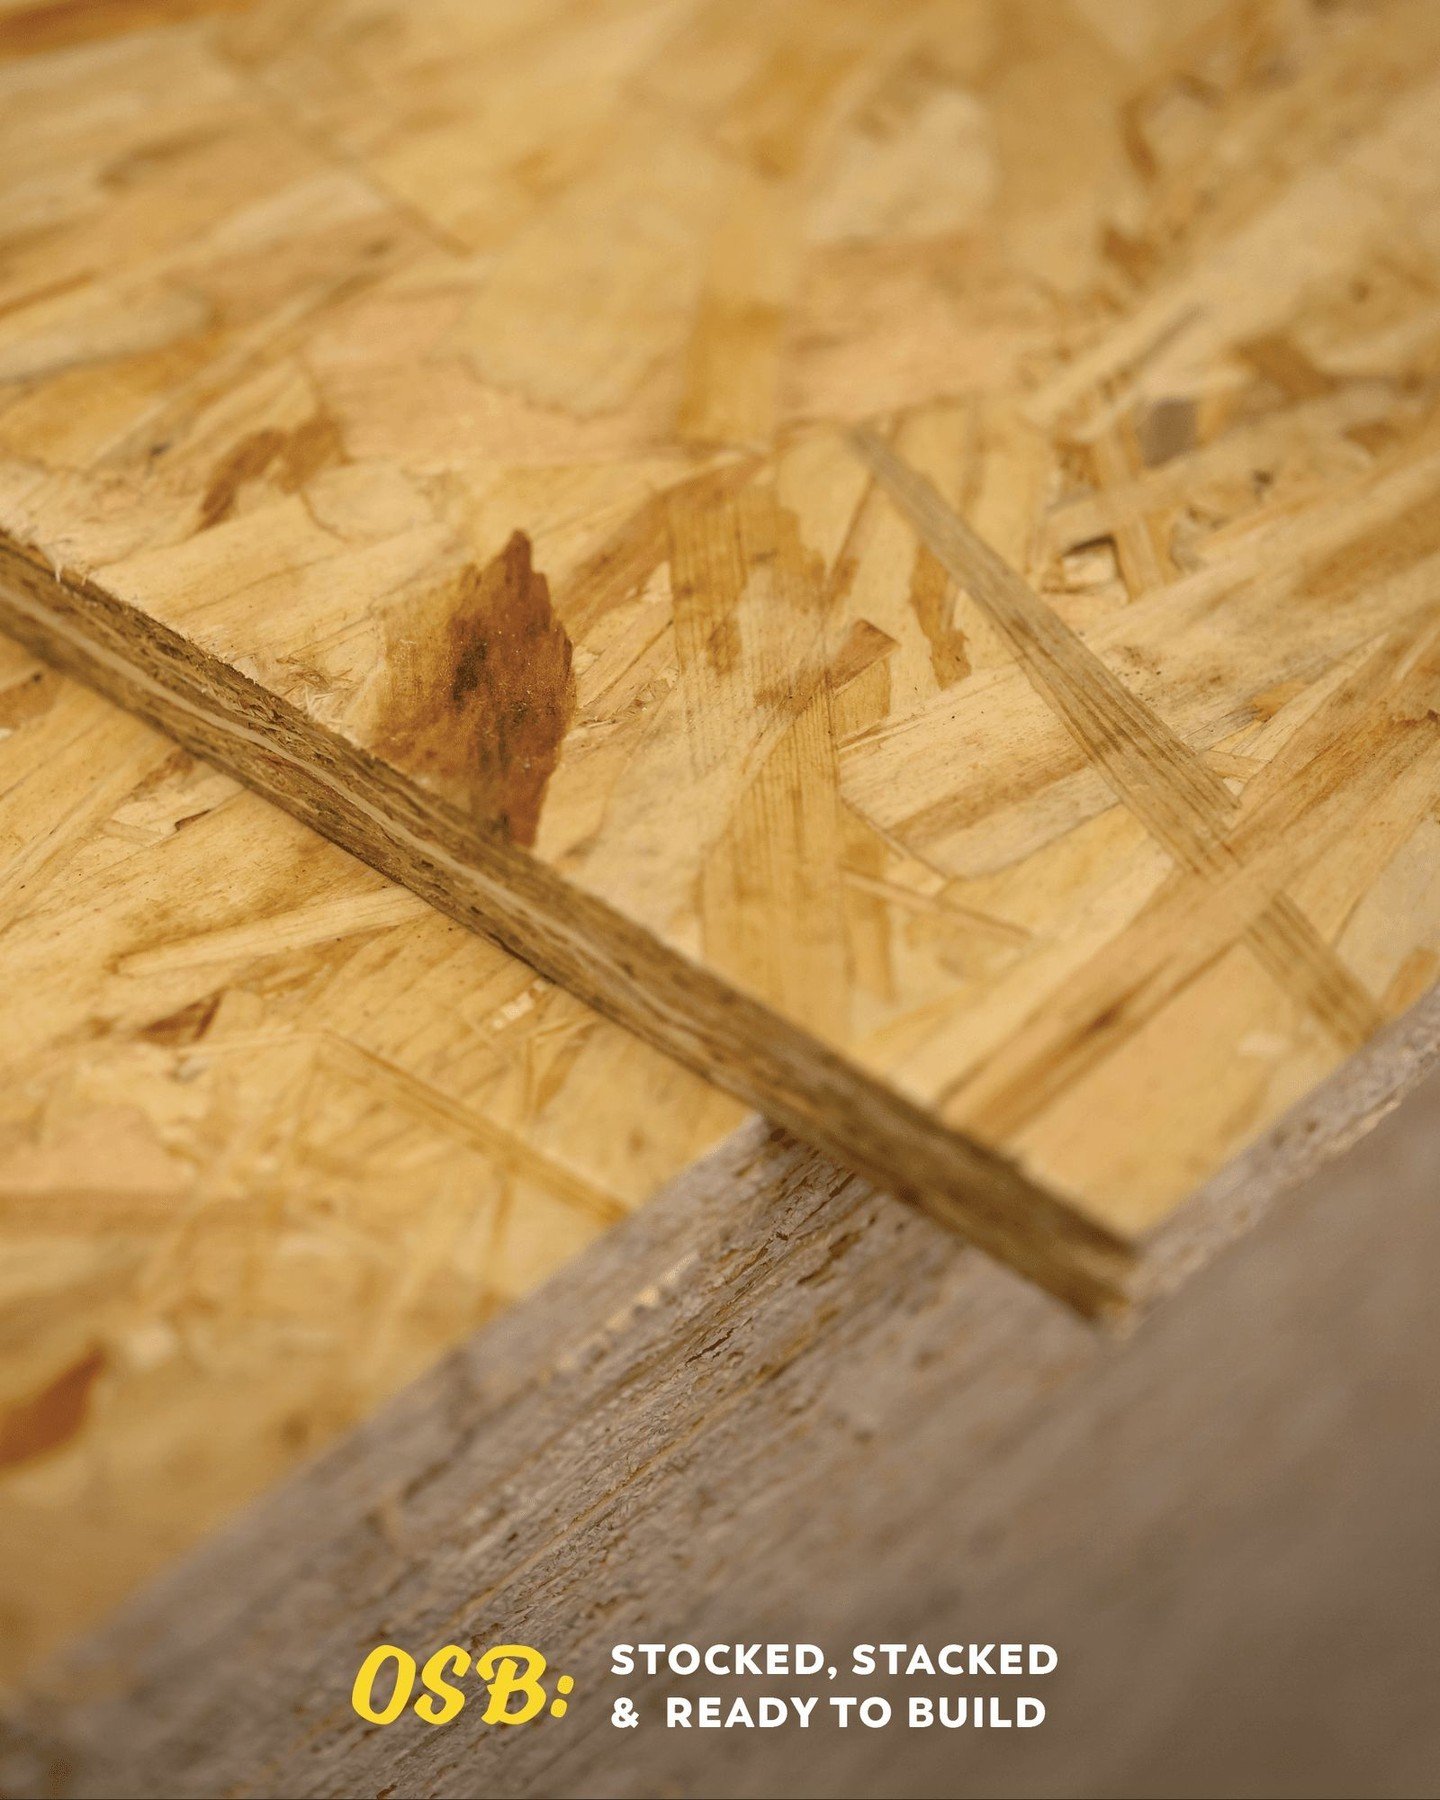 Building dreams one sheet of OSB at a time! At Burk&rsquo;s Falls Home Building Centre, we&rsquo;re stocked and stacked with sheets of OSB for the building season ahead. 

Whether it&rsquo;s framing, sheathing or decking, OSB&rsquo;s versatility pave